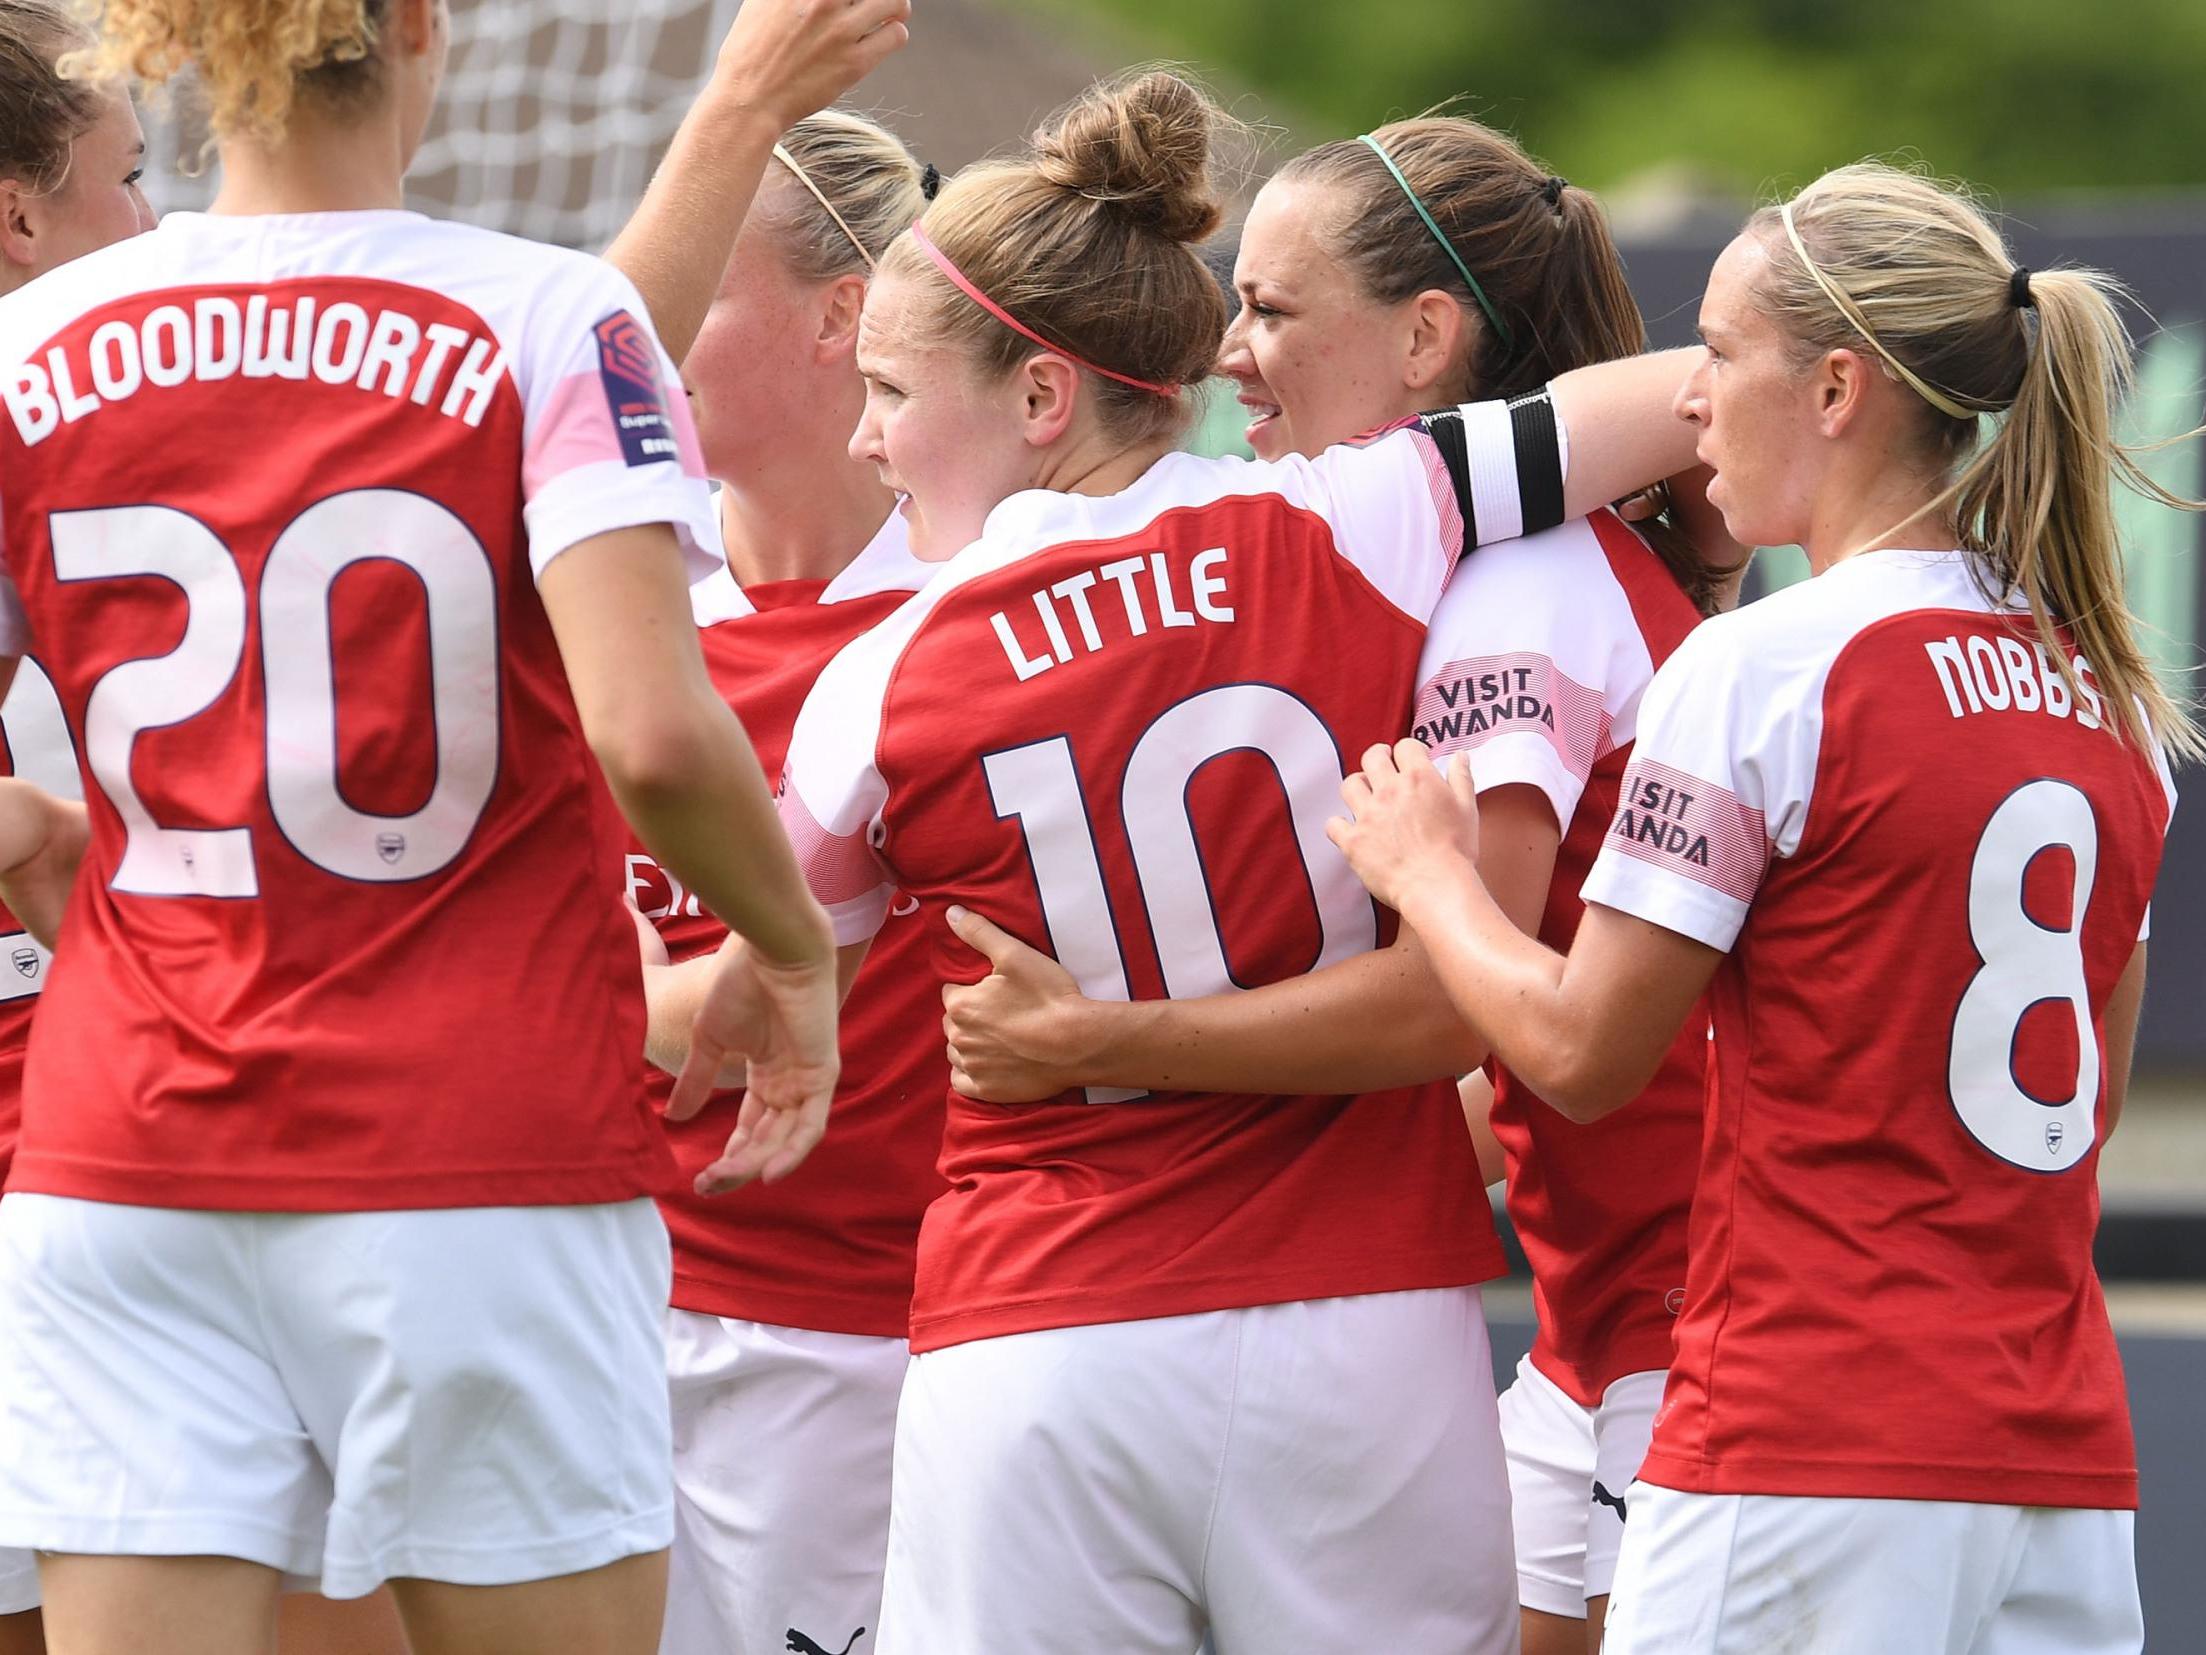 Arsenal made a winning start in the WSL campaign